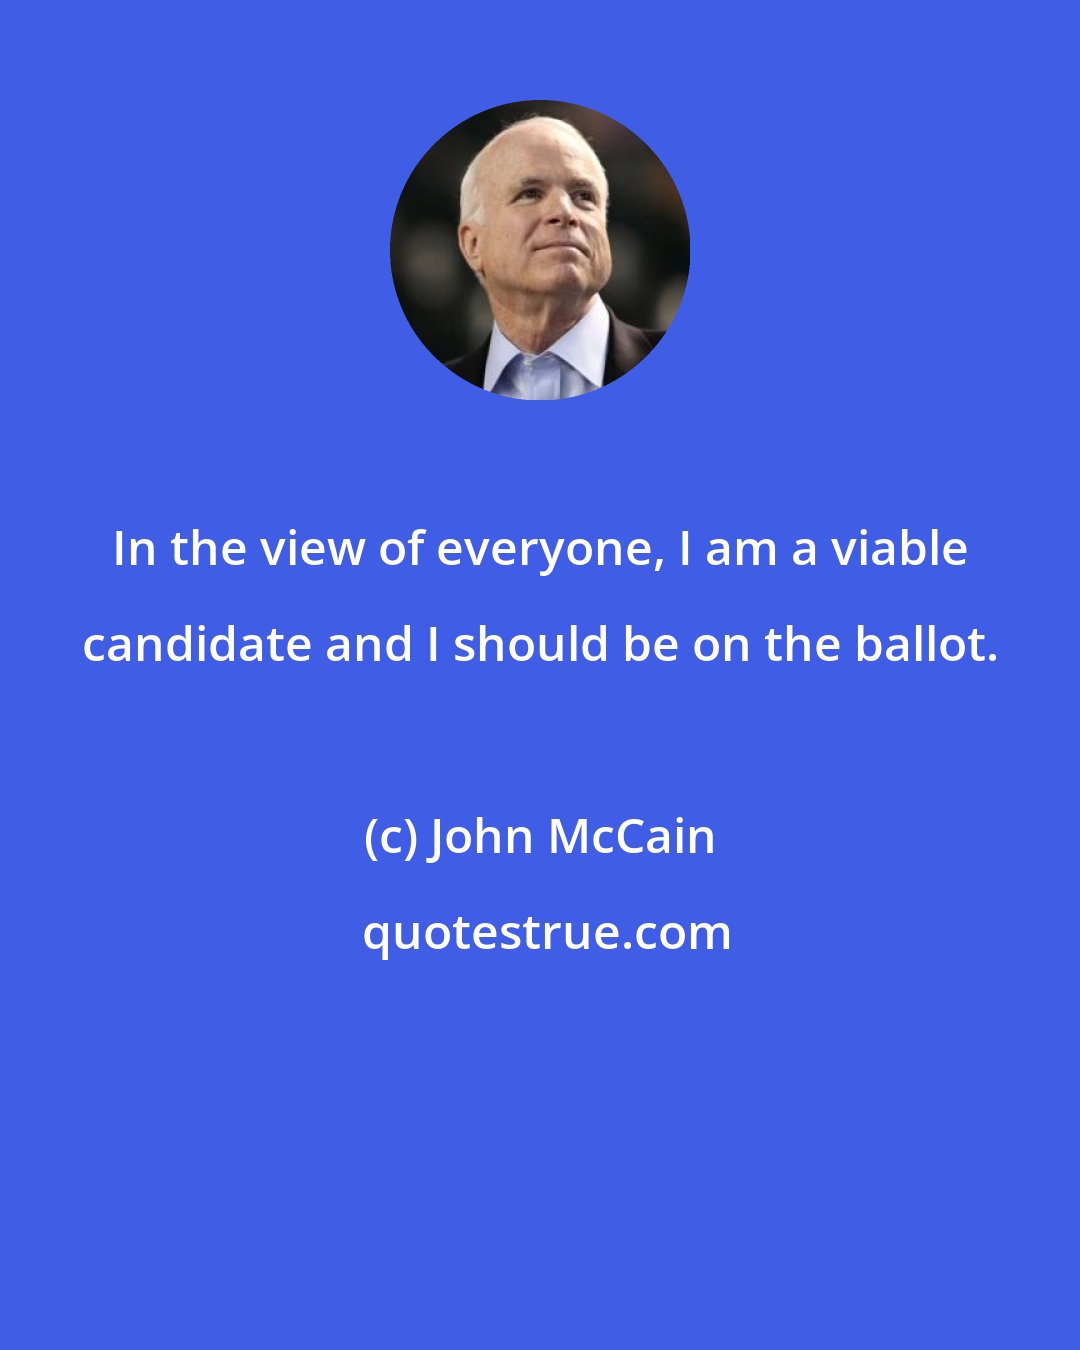 John McCain: In the view of everyone, I am a viable candidate and I should be on the ballot.